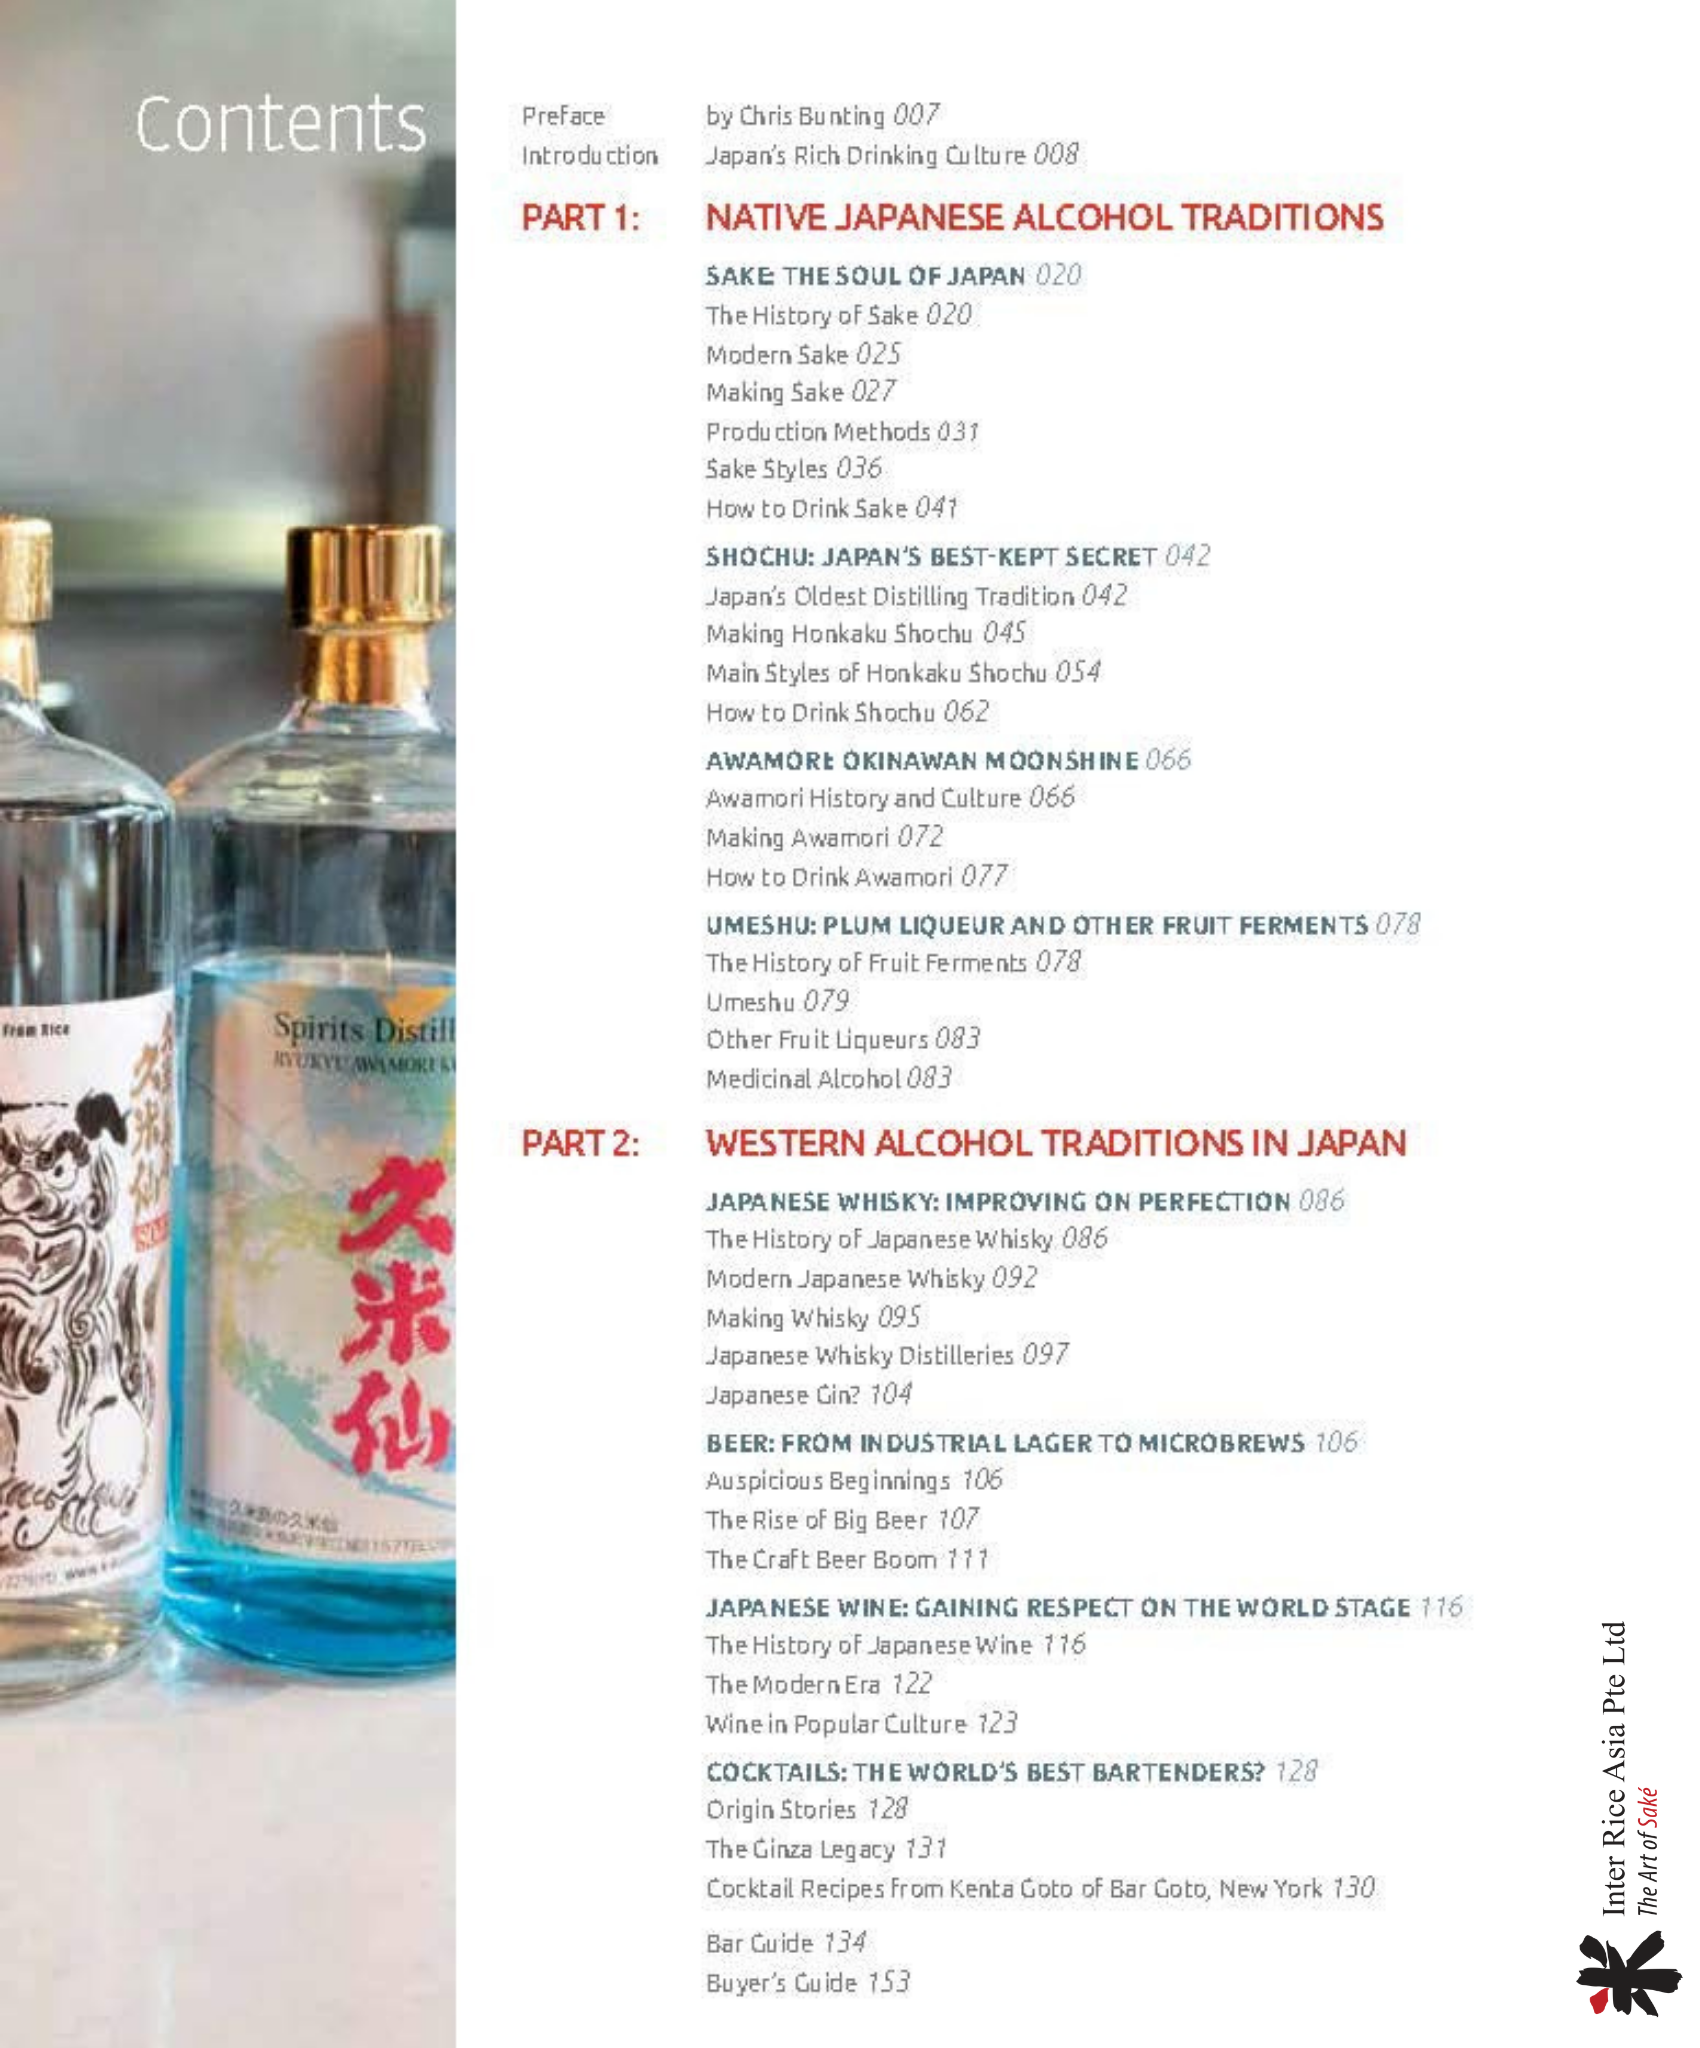 The Complete Guide to Japanese Drinks – The Art of Sake